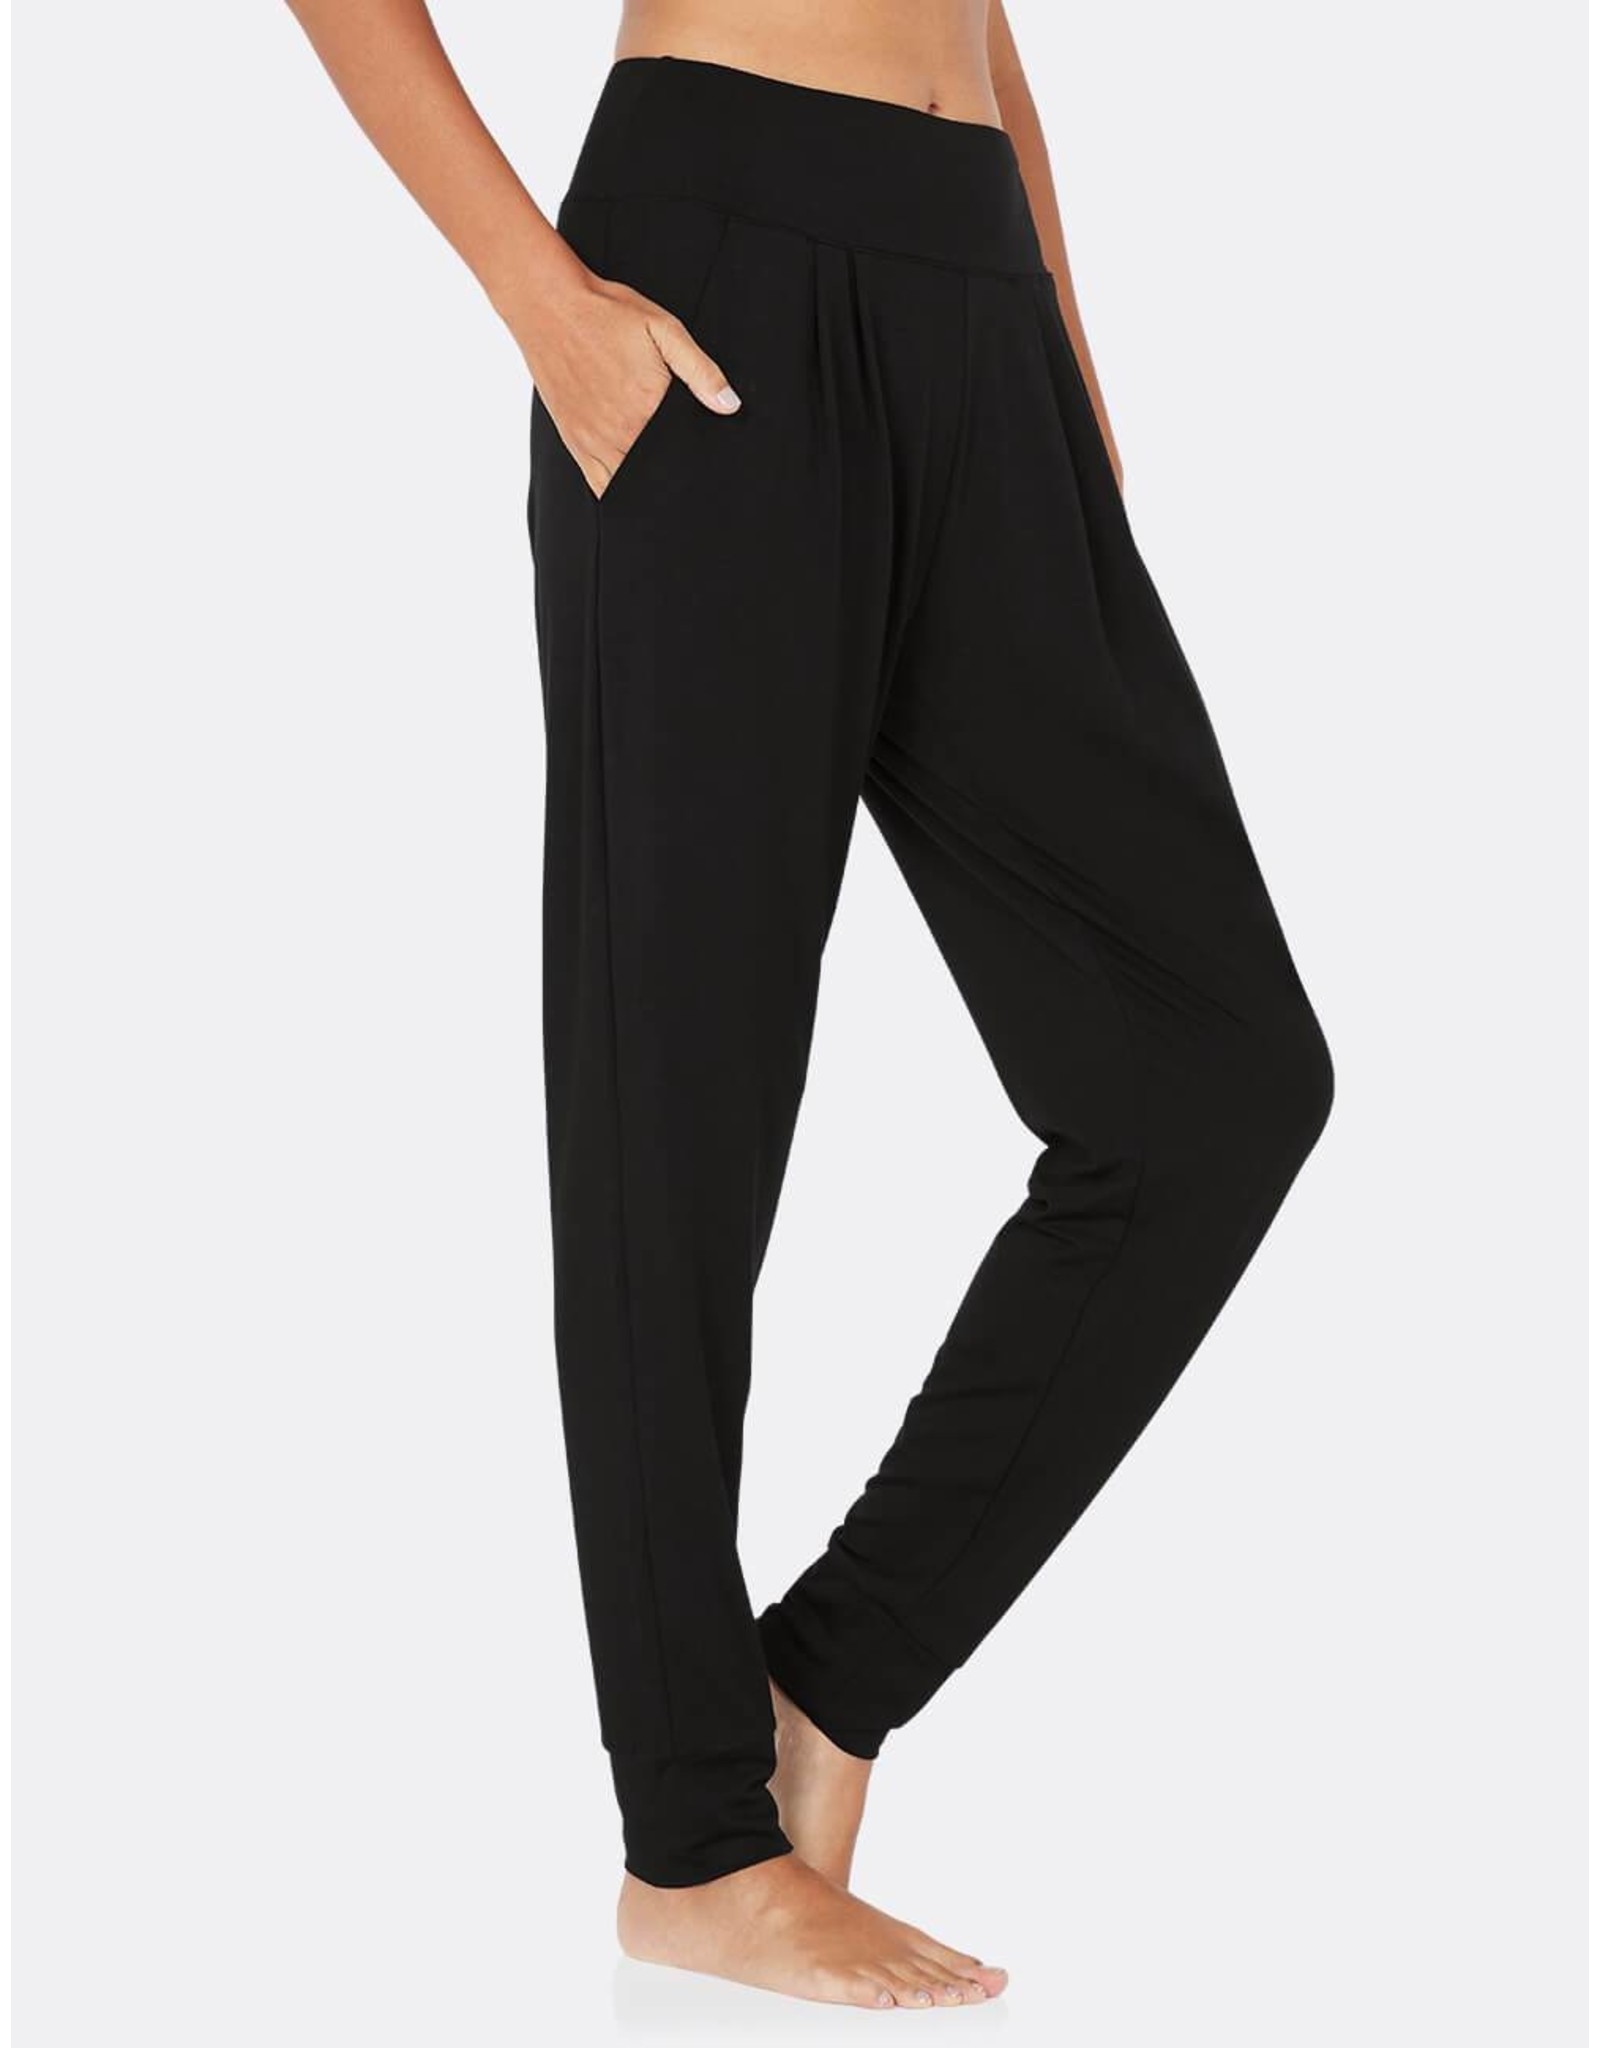 Boody Downtime Slim Leg Lounge Pant - The Apple Tree